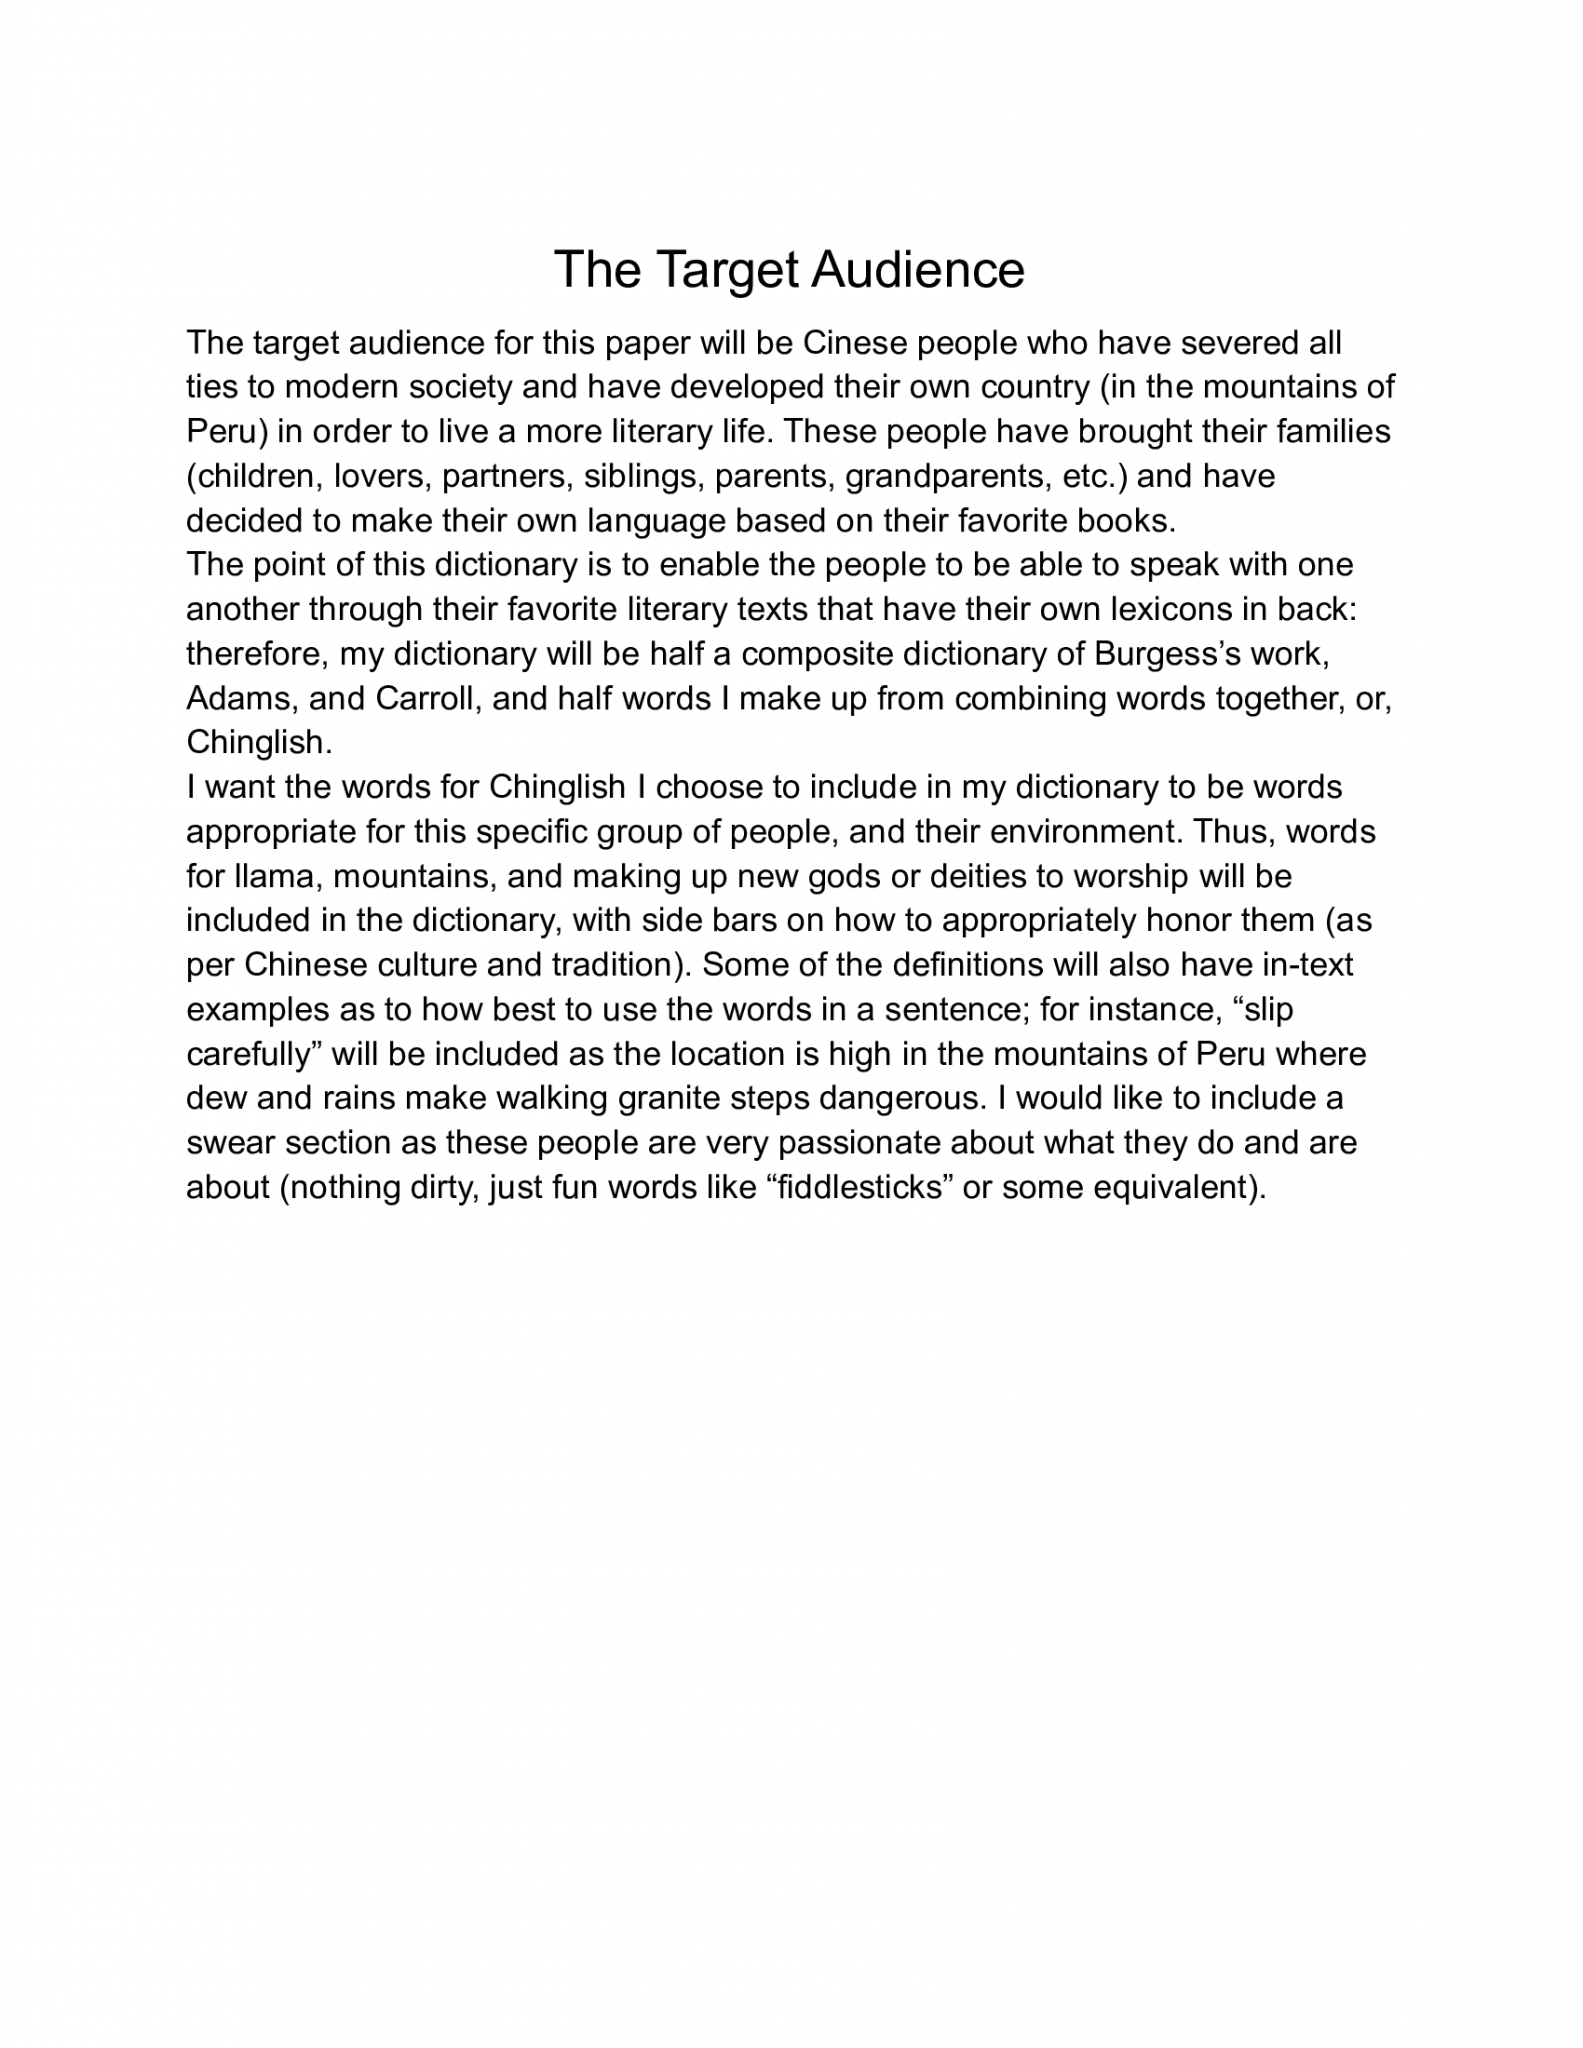 audience analysis assignment example